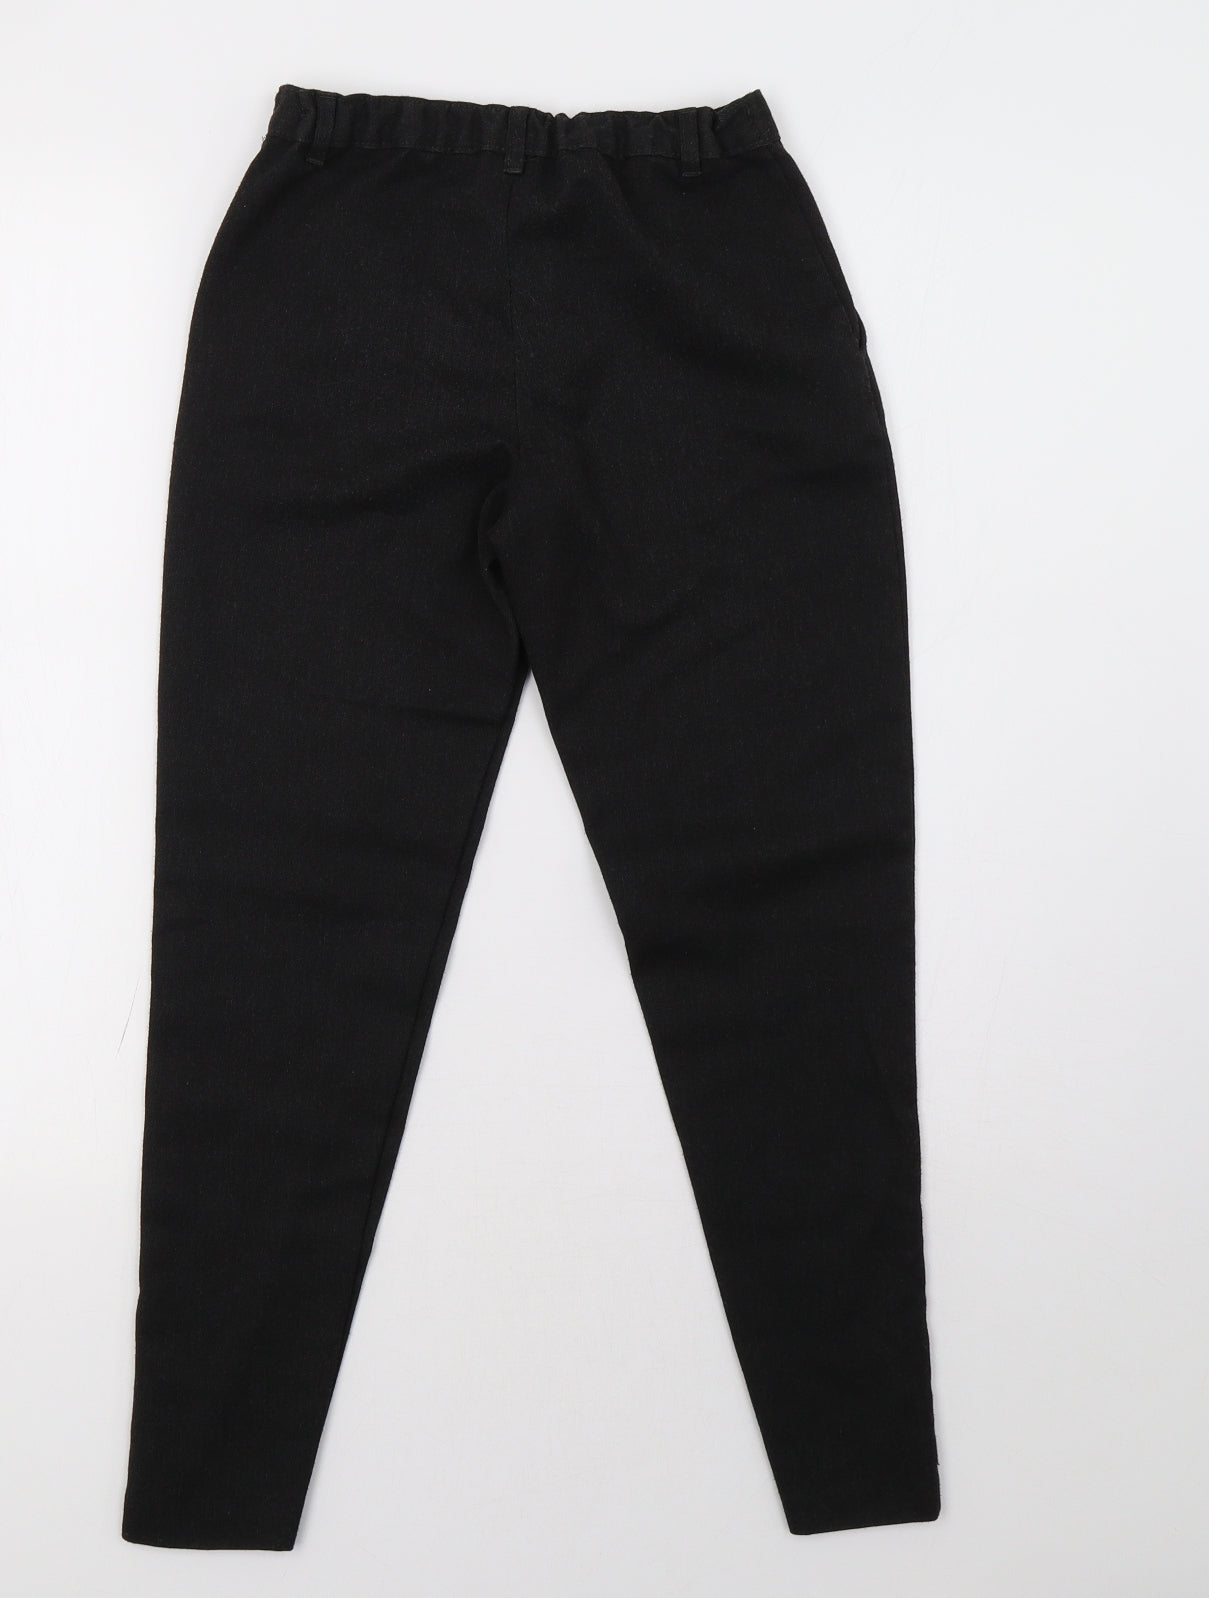 George Boys Grey    Trousers Size 10 Years